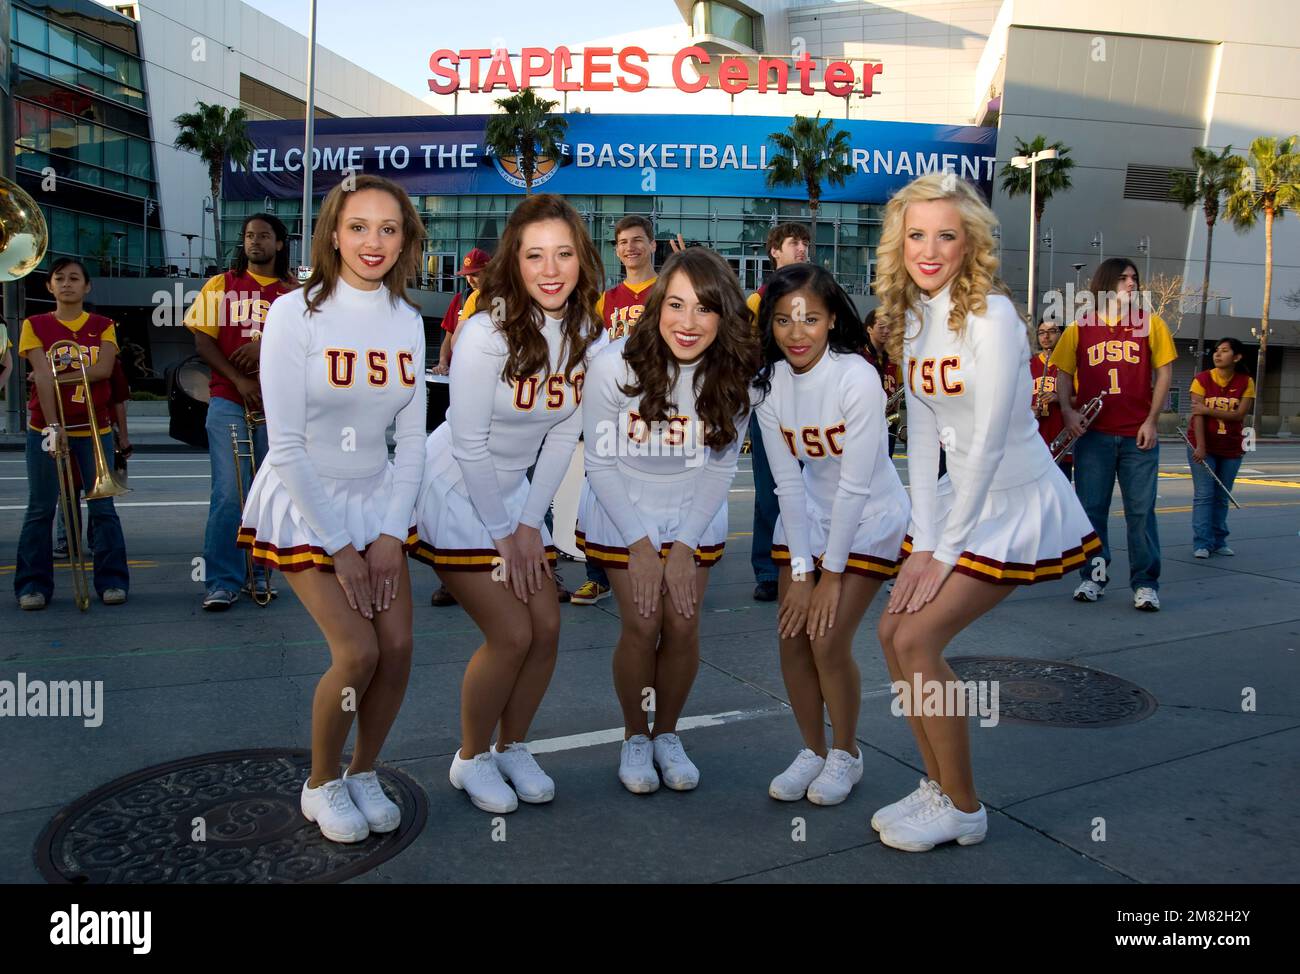 Cheerleaders for USC, the University of Southern California, appear at an event at L.A. Live in downtwon Los Angeles, CA, US Stock Photo